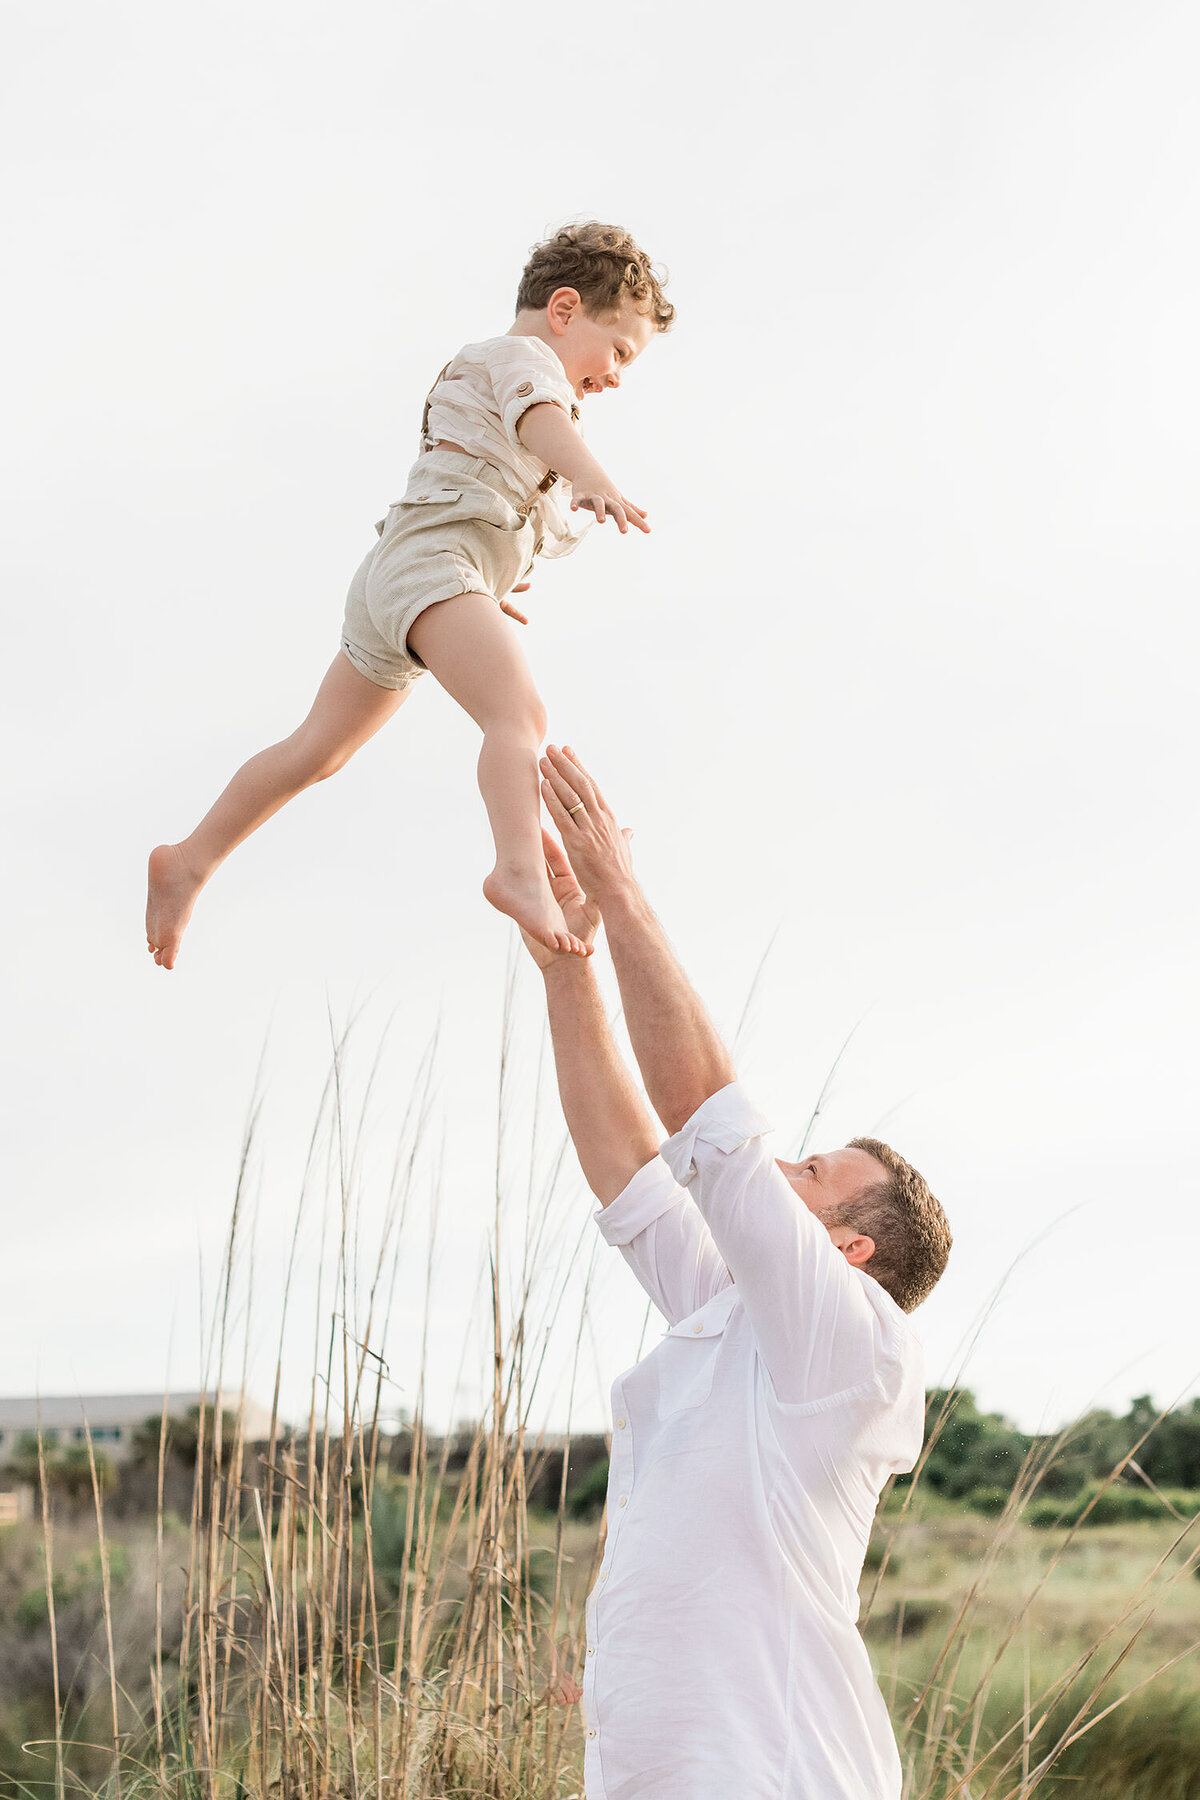 a father is tossing his son high up in the air in a beautiful; beach location